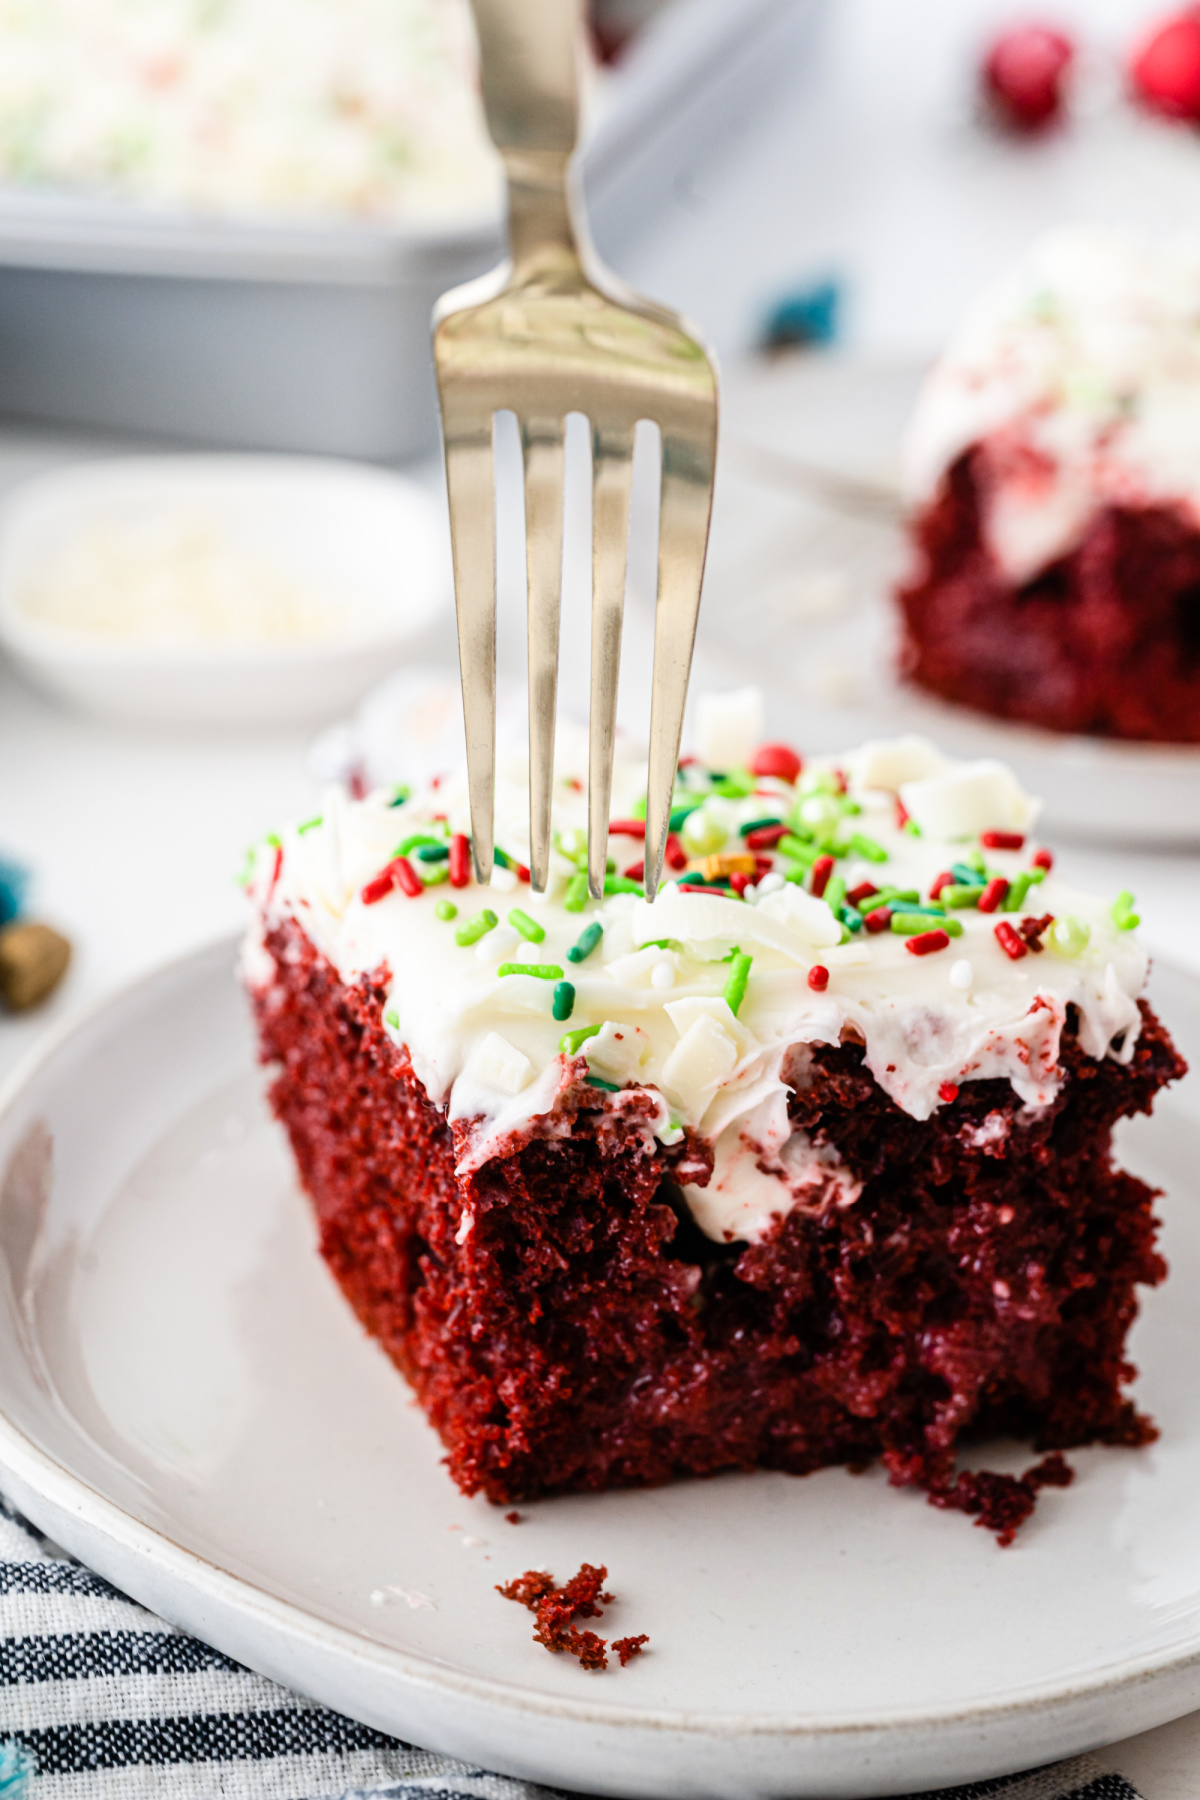 A slice of red velvet cake on a plate with a fork.